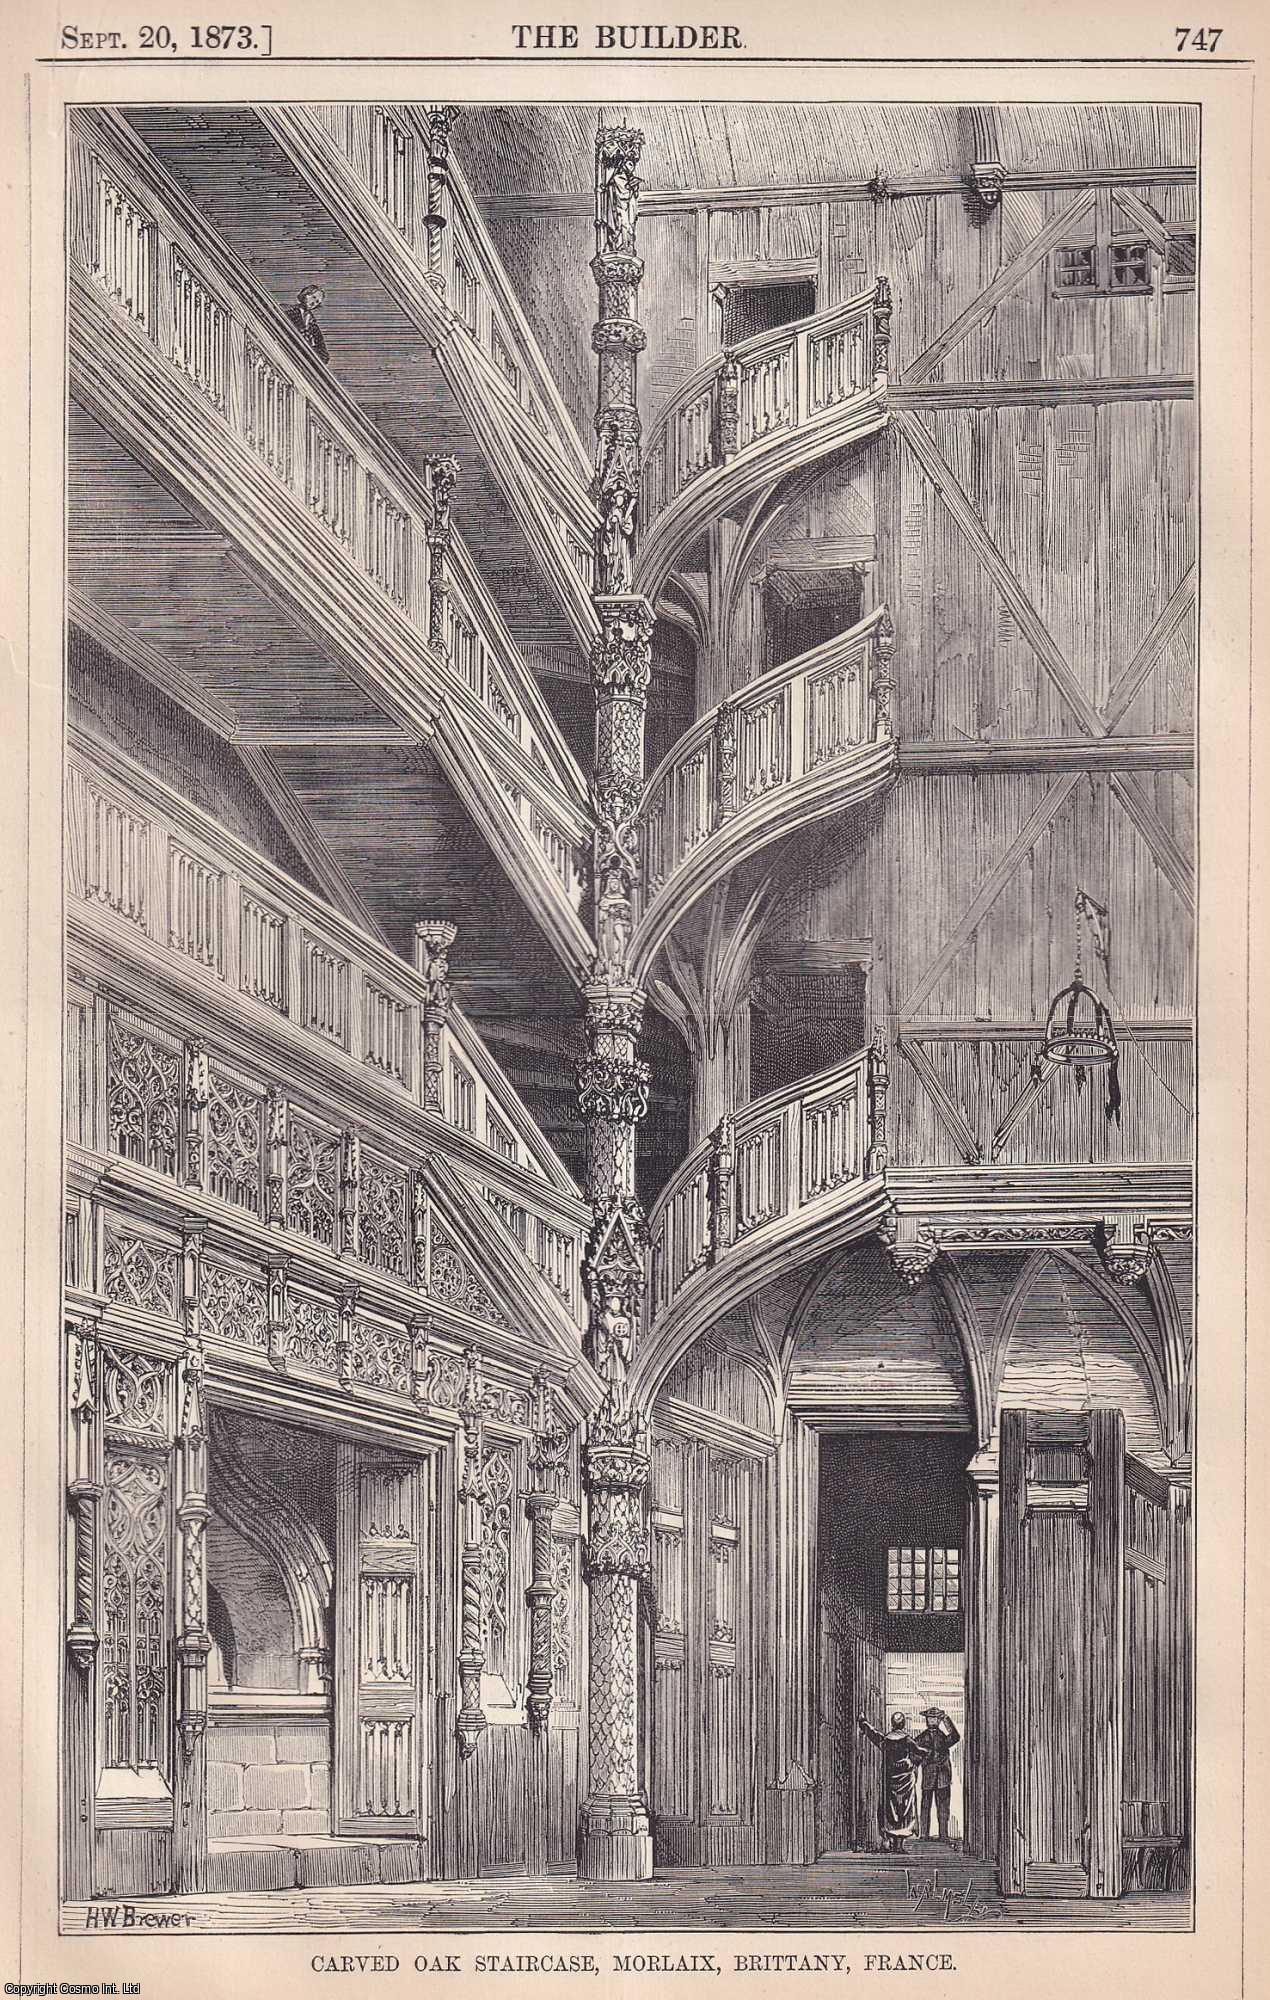 OAK STAIRCASE - 1873 : Carved Oak Staircase, Morlaix, Brittany, France. An original page from The Builder. An Illustrated Weekly Magazine, for the Architect, Engineer, Archaeologist, Constructor, & Art-Lover.